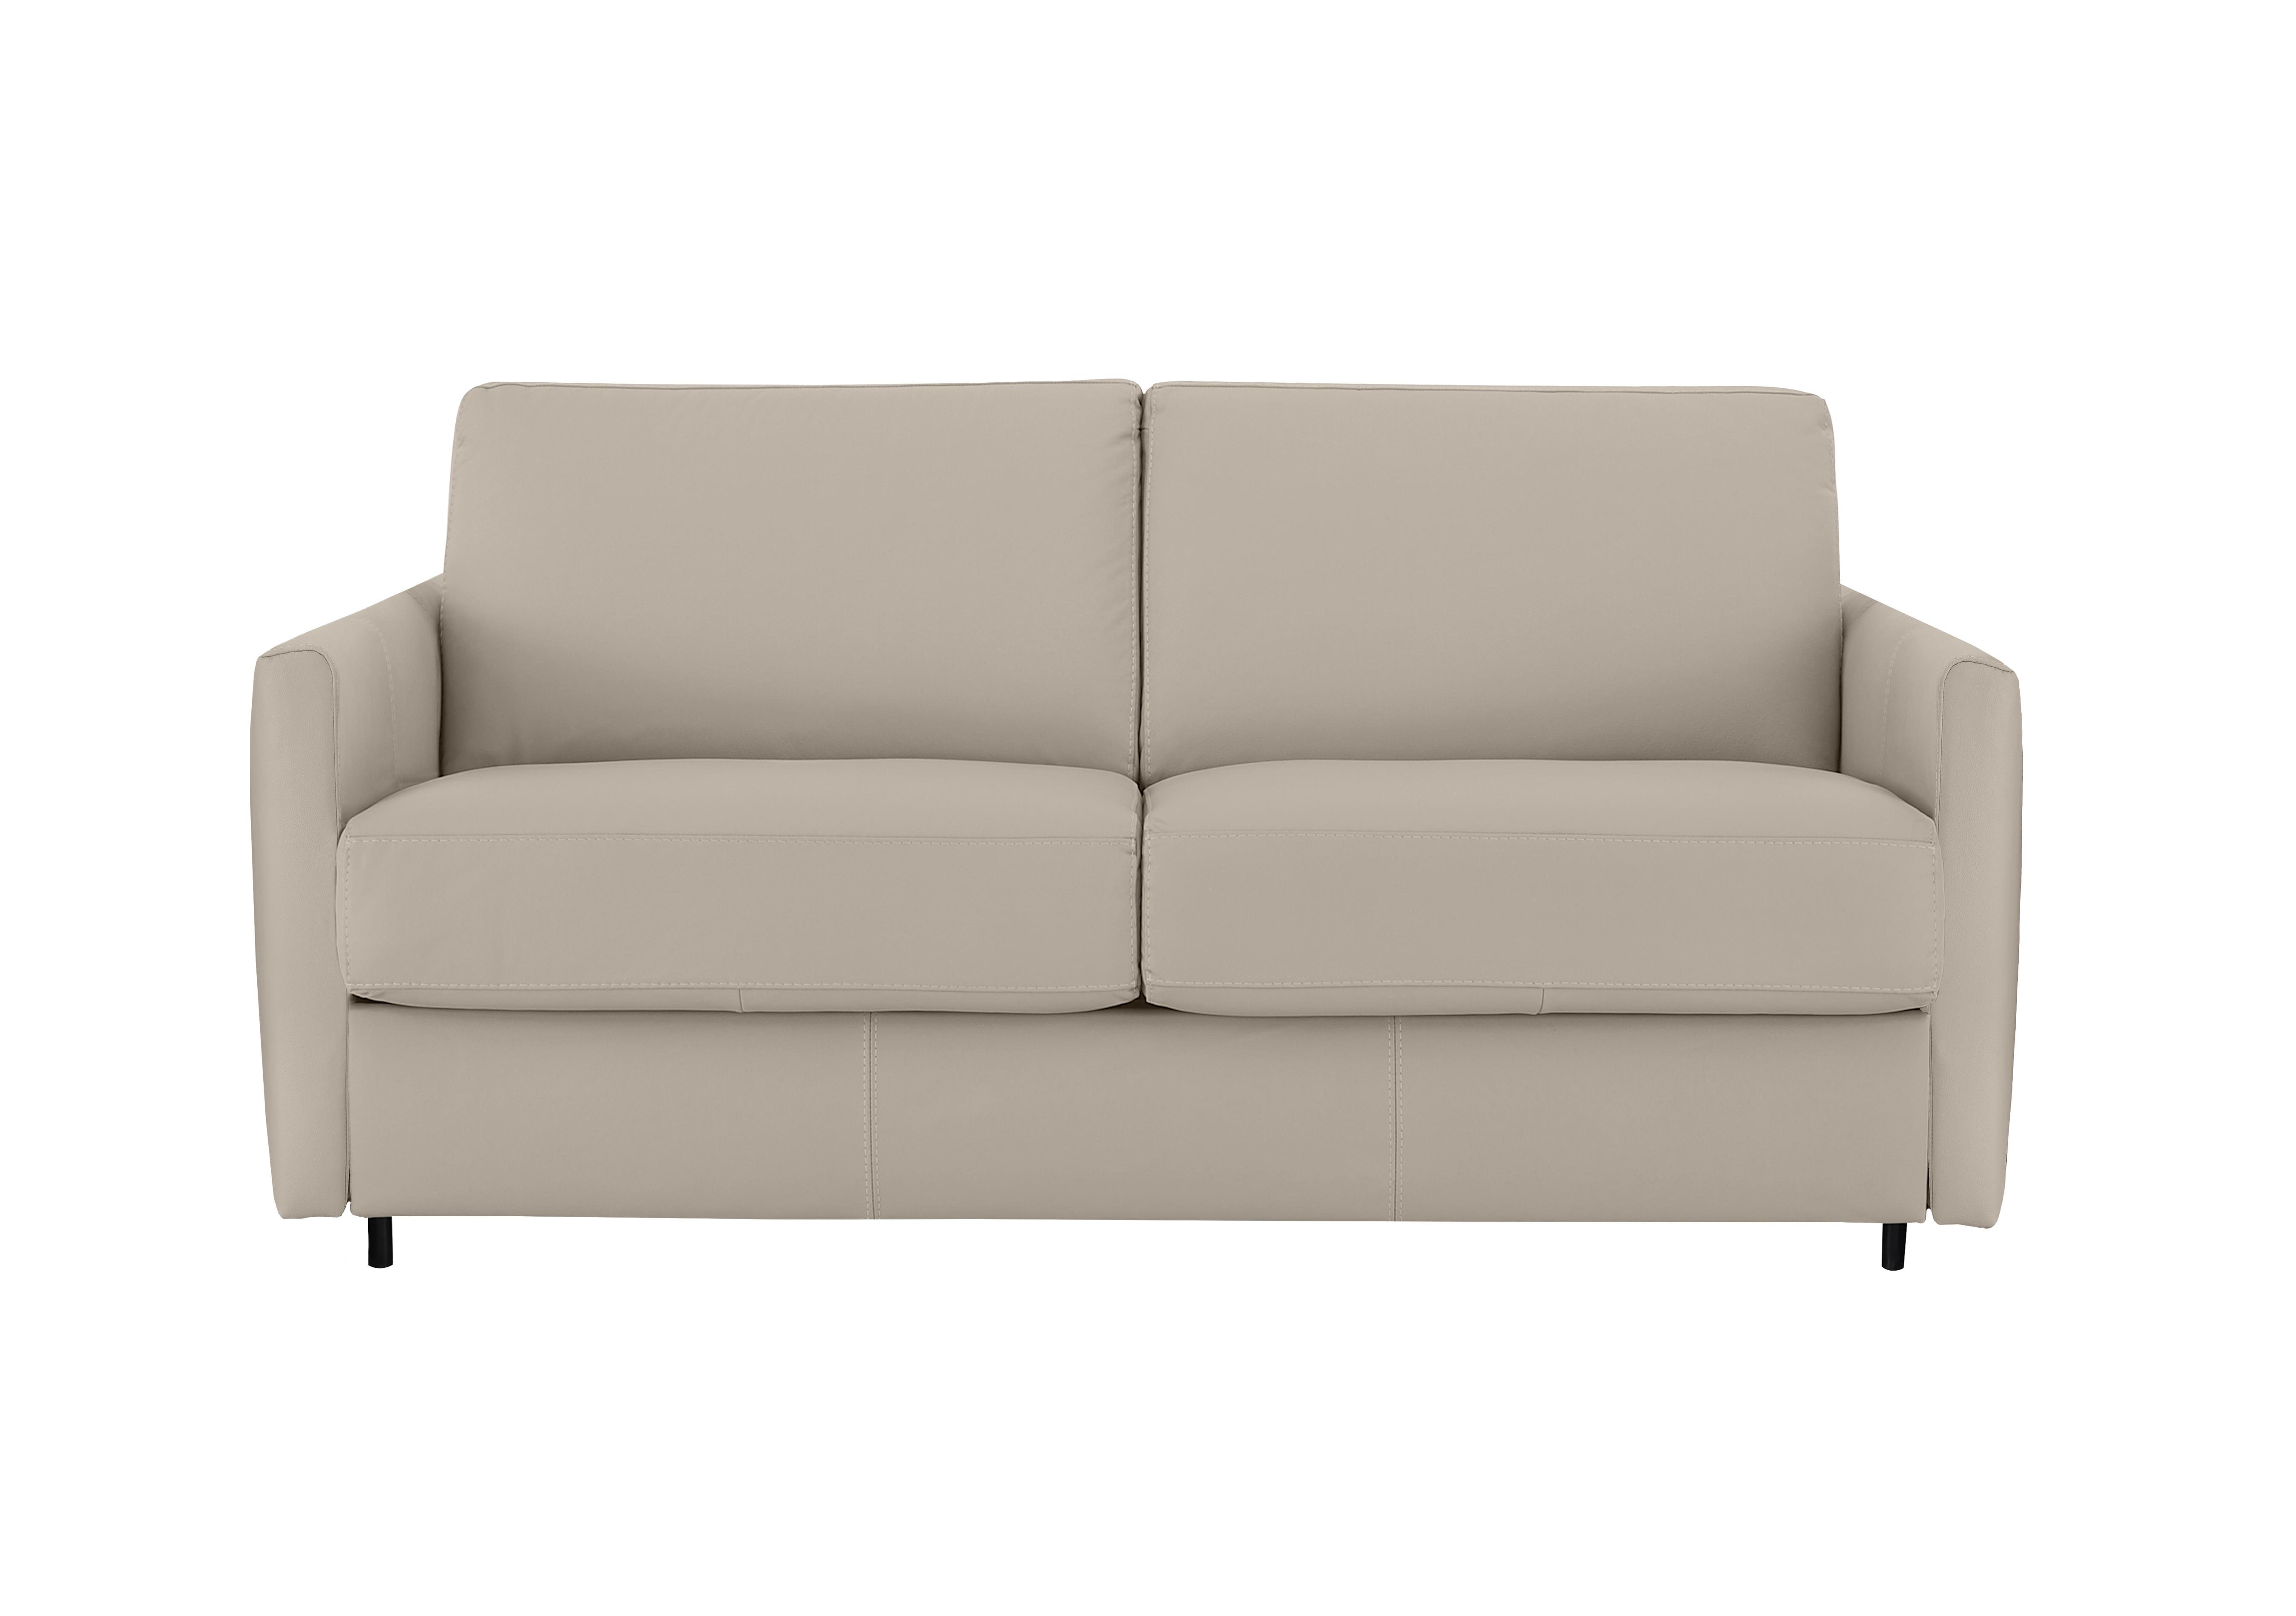 Alcova 2.5 Seater Leather Sofa Bed with Slim Arms in Botero Crema 2156 on Furniture Village